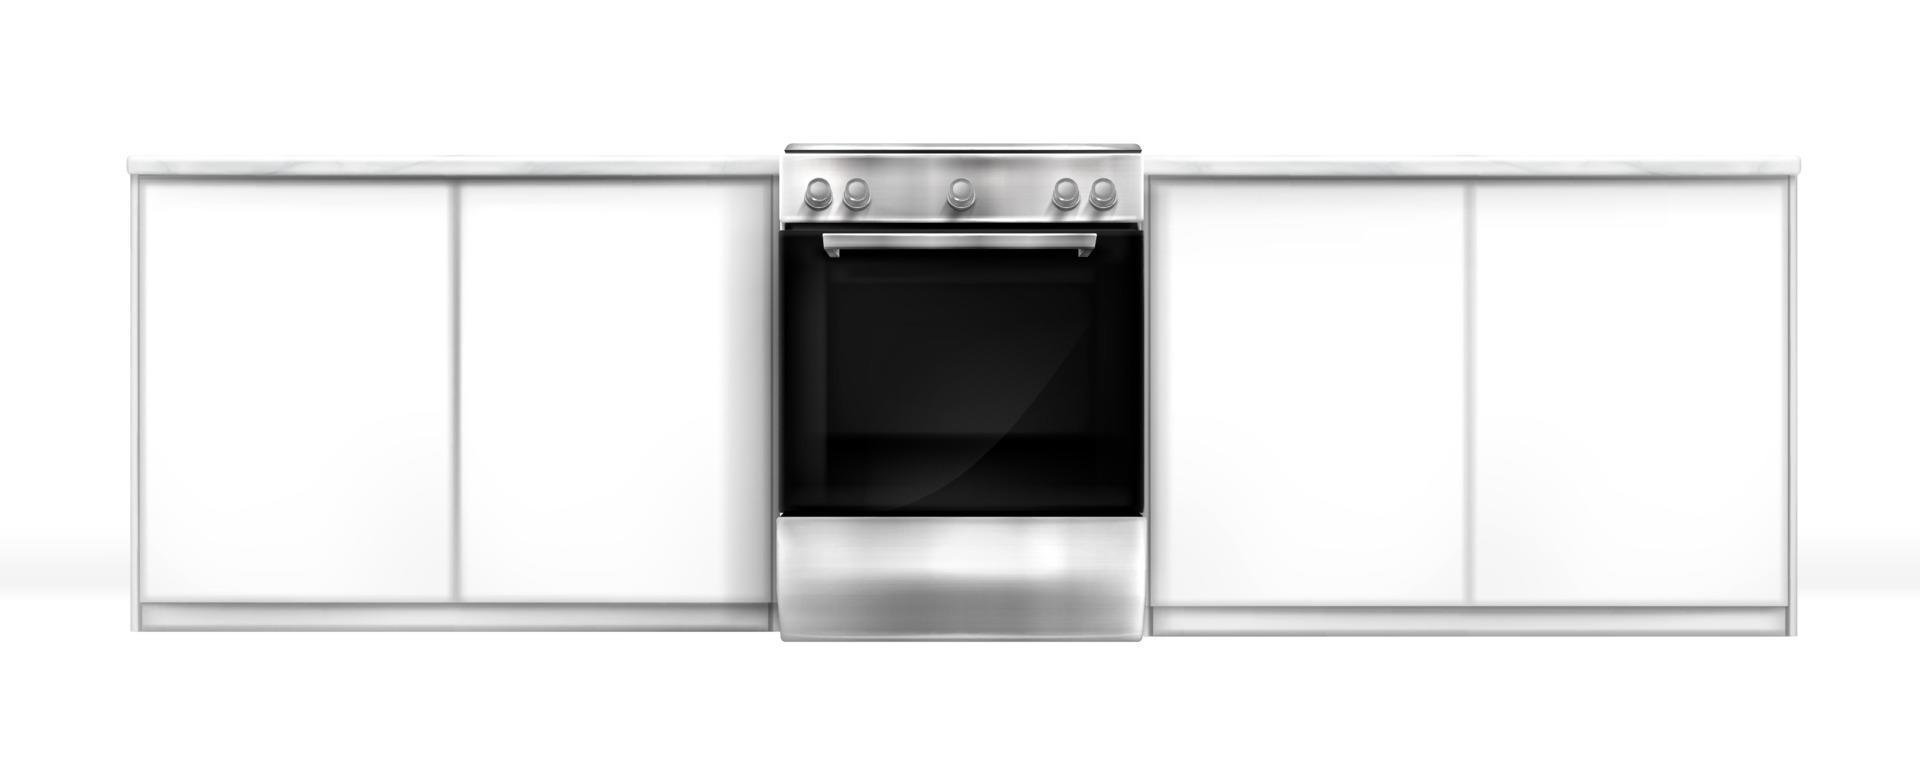 Oven in kitchen desk, electric built-in appliance vector